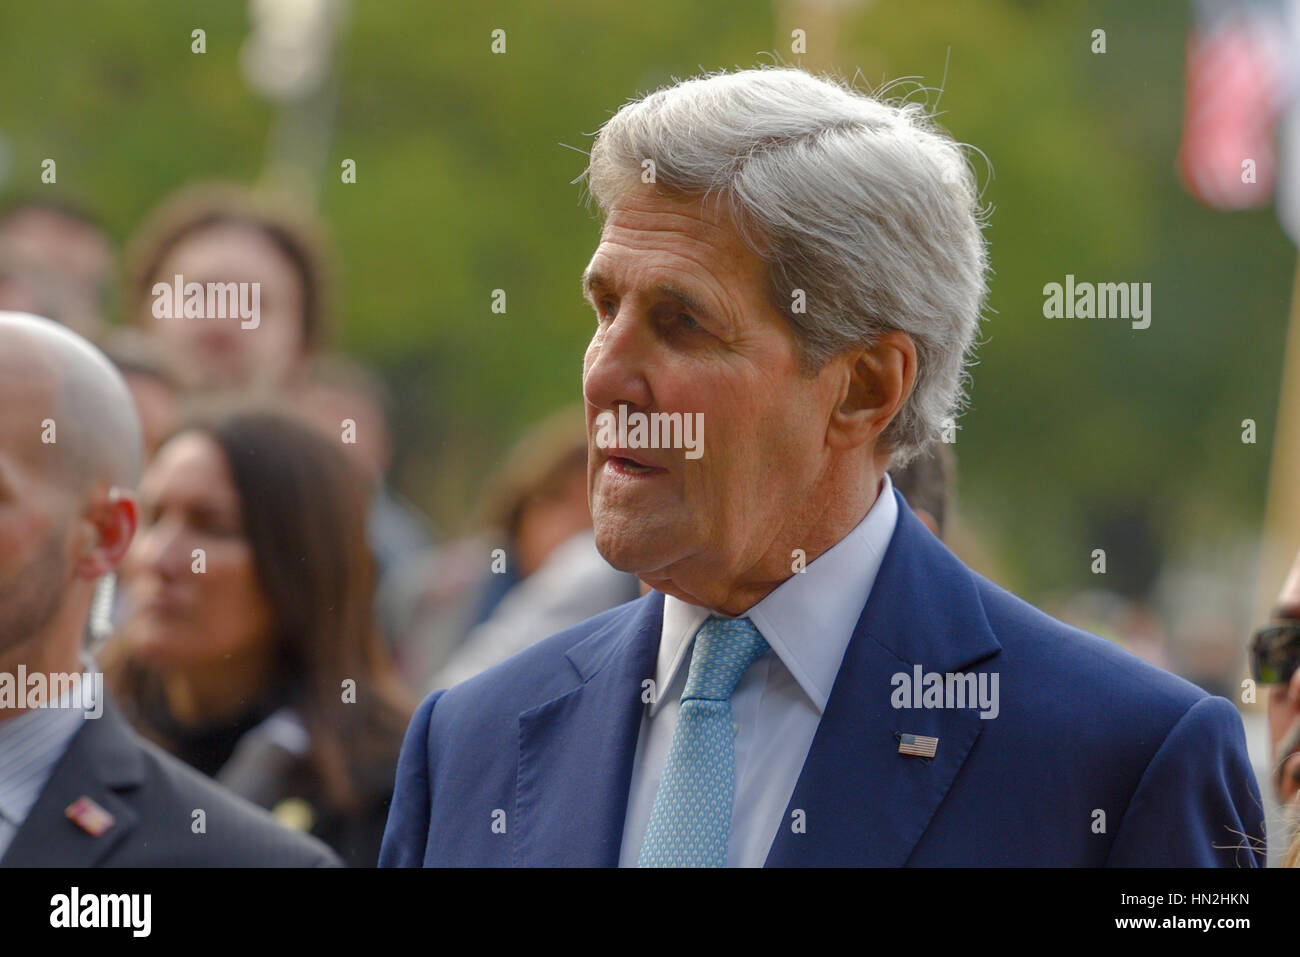 Buenos Aires, Argentina - Aug 4, 2016: United States Secretary of State John Kerry during his visit at Plaza San Martin. Stock Photo